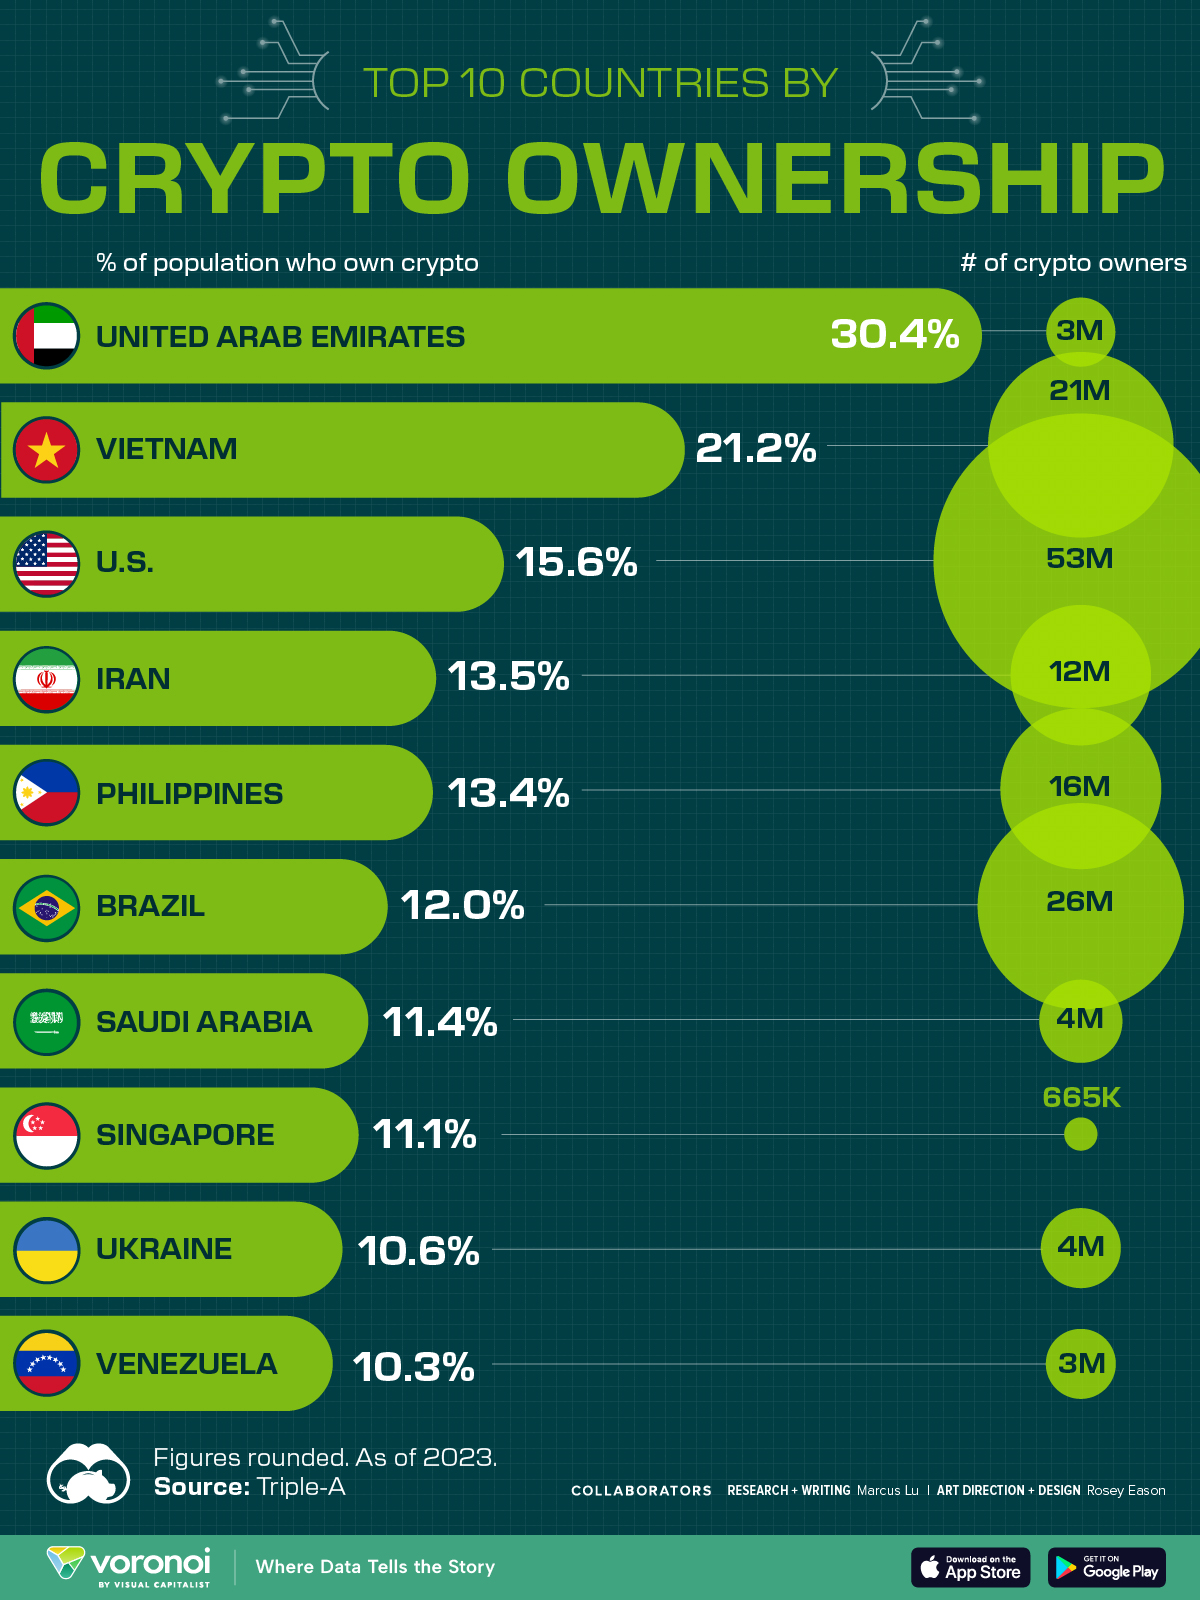 Graphic showing the top countries by crypto ownership rate